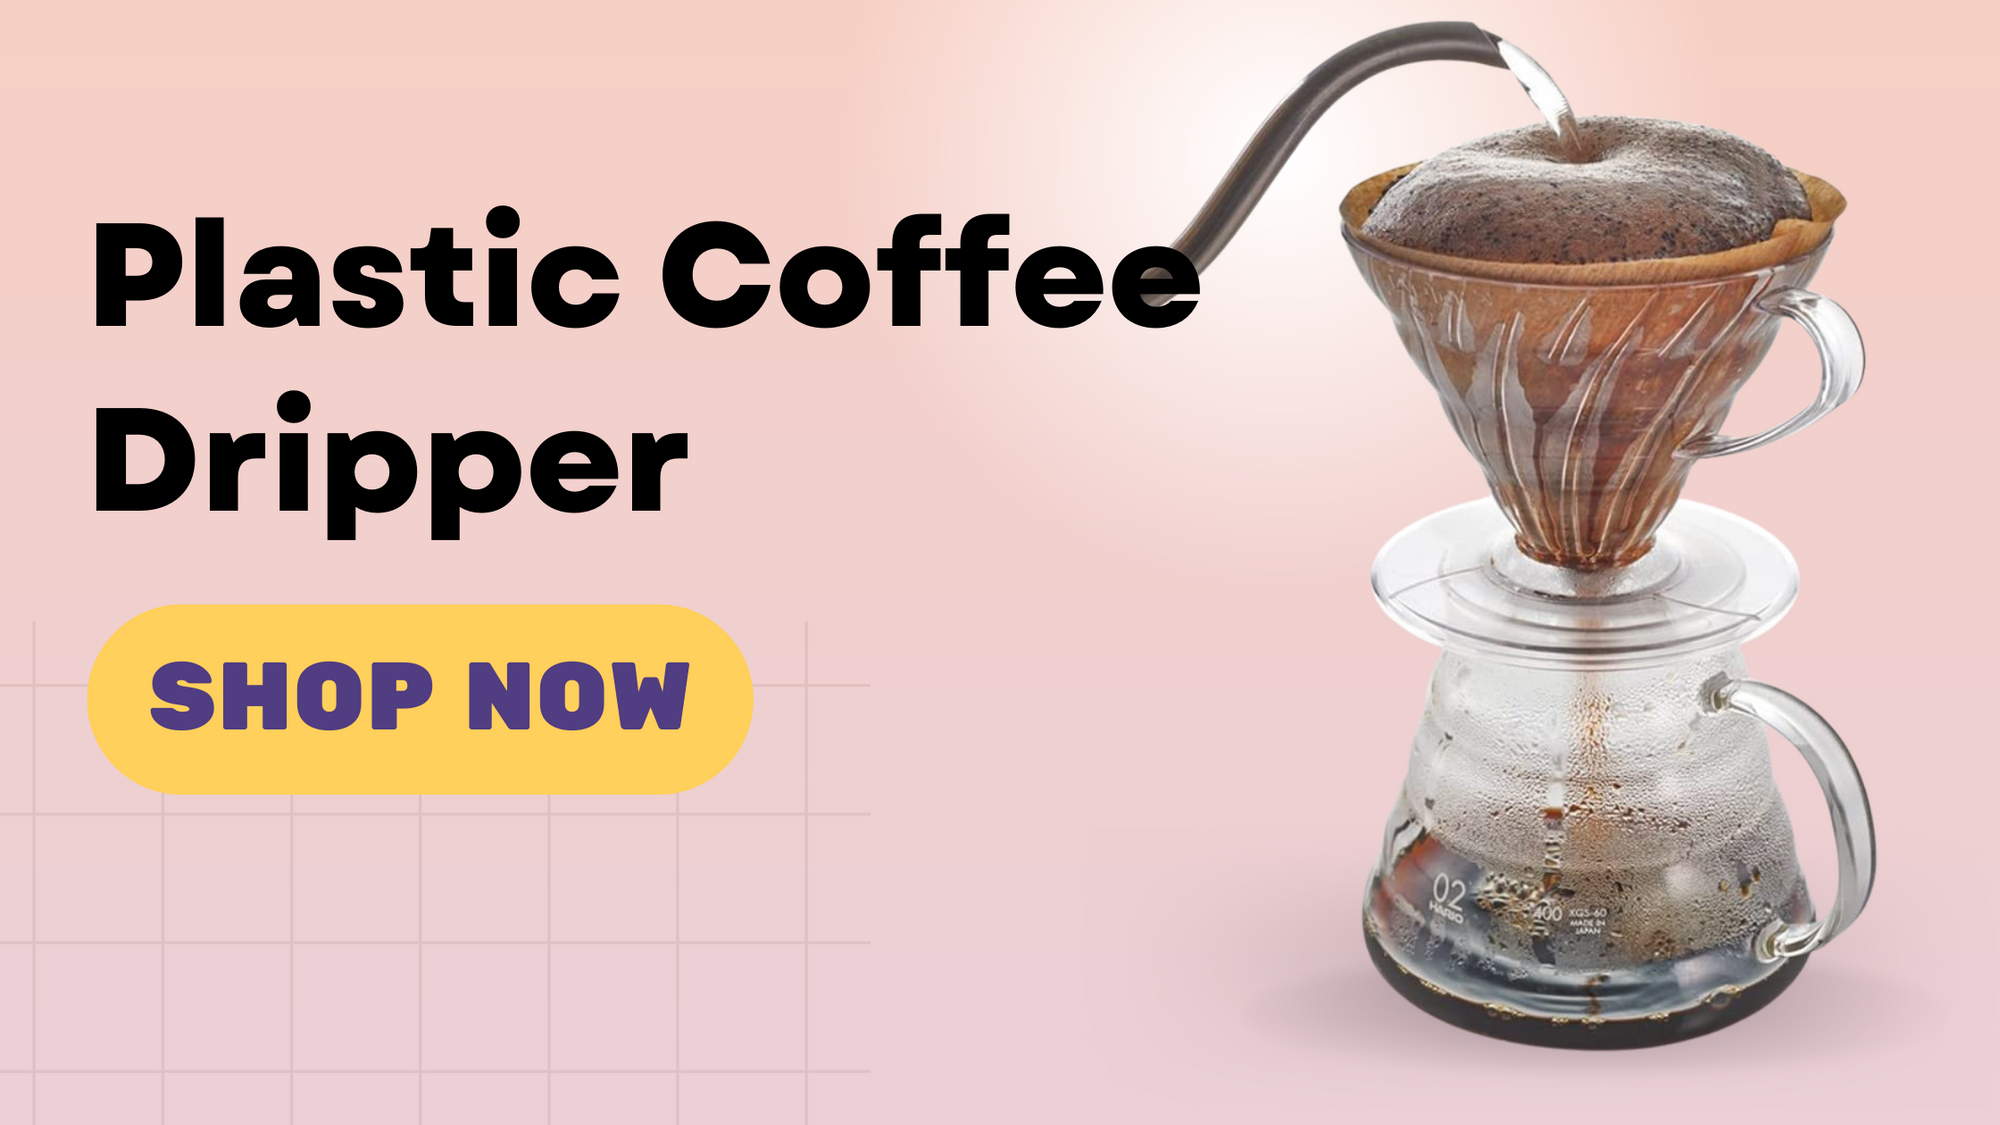 Elevate Your Coffee Brewing with the Hario V60 Plastic Coffee Dripper